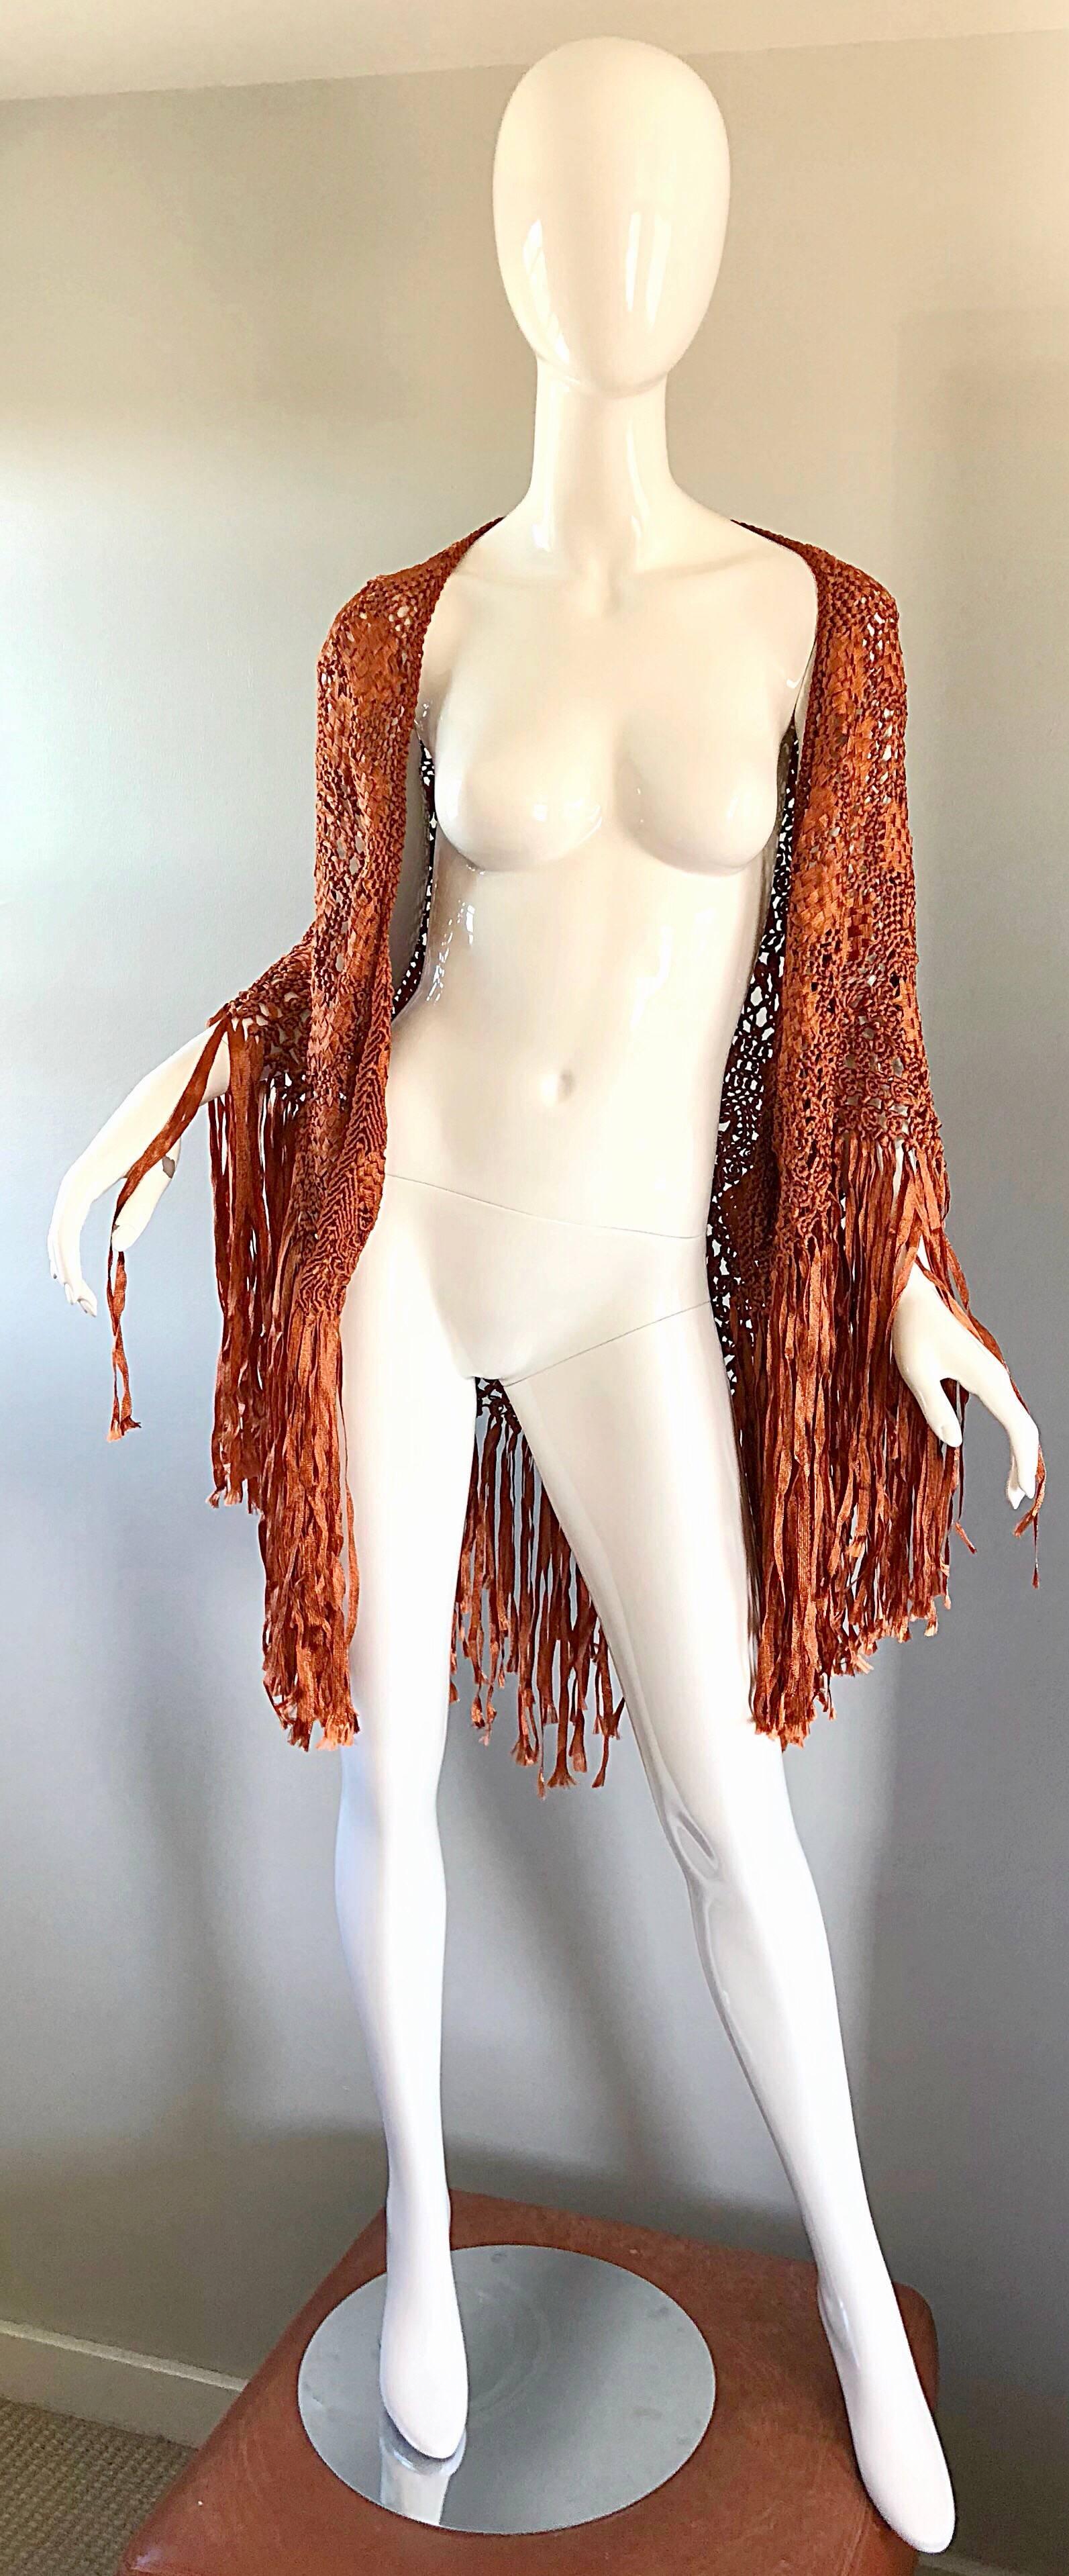 Lovely 1970s hand woven Terra-cotta / brown / tan / caramel rayon crochet extra large piano shawl! The perfect accessory to add to any outfit / ensemble! Dramatic fringe and elaborate craftmanship. In great condition. 